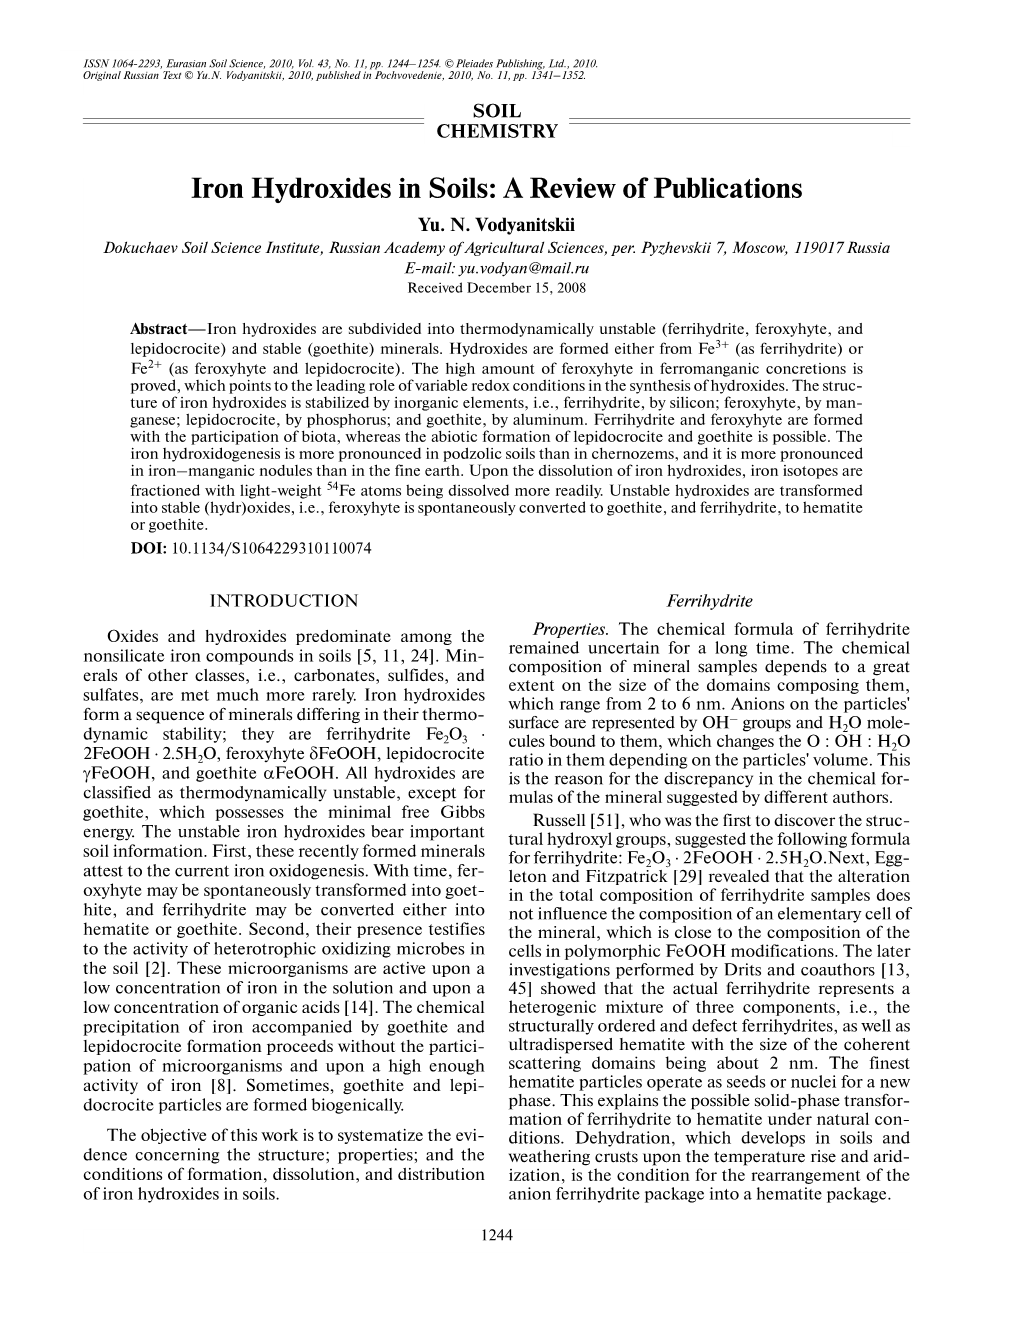 Iron Hydroxides in Soils: a Review of Publications Yu